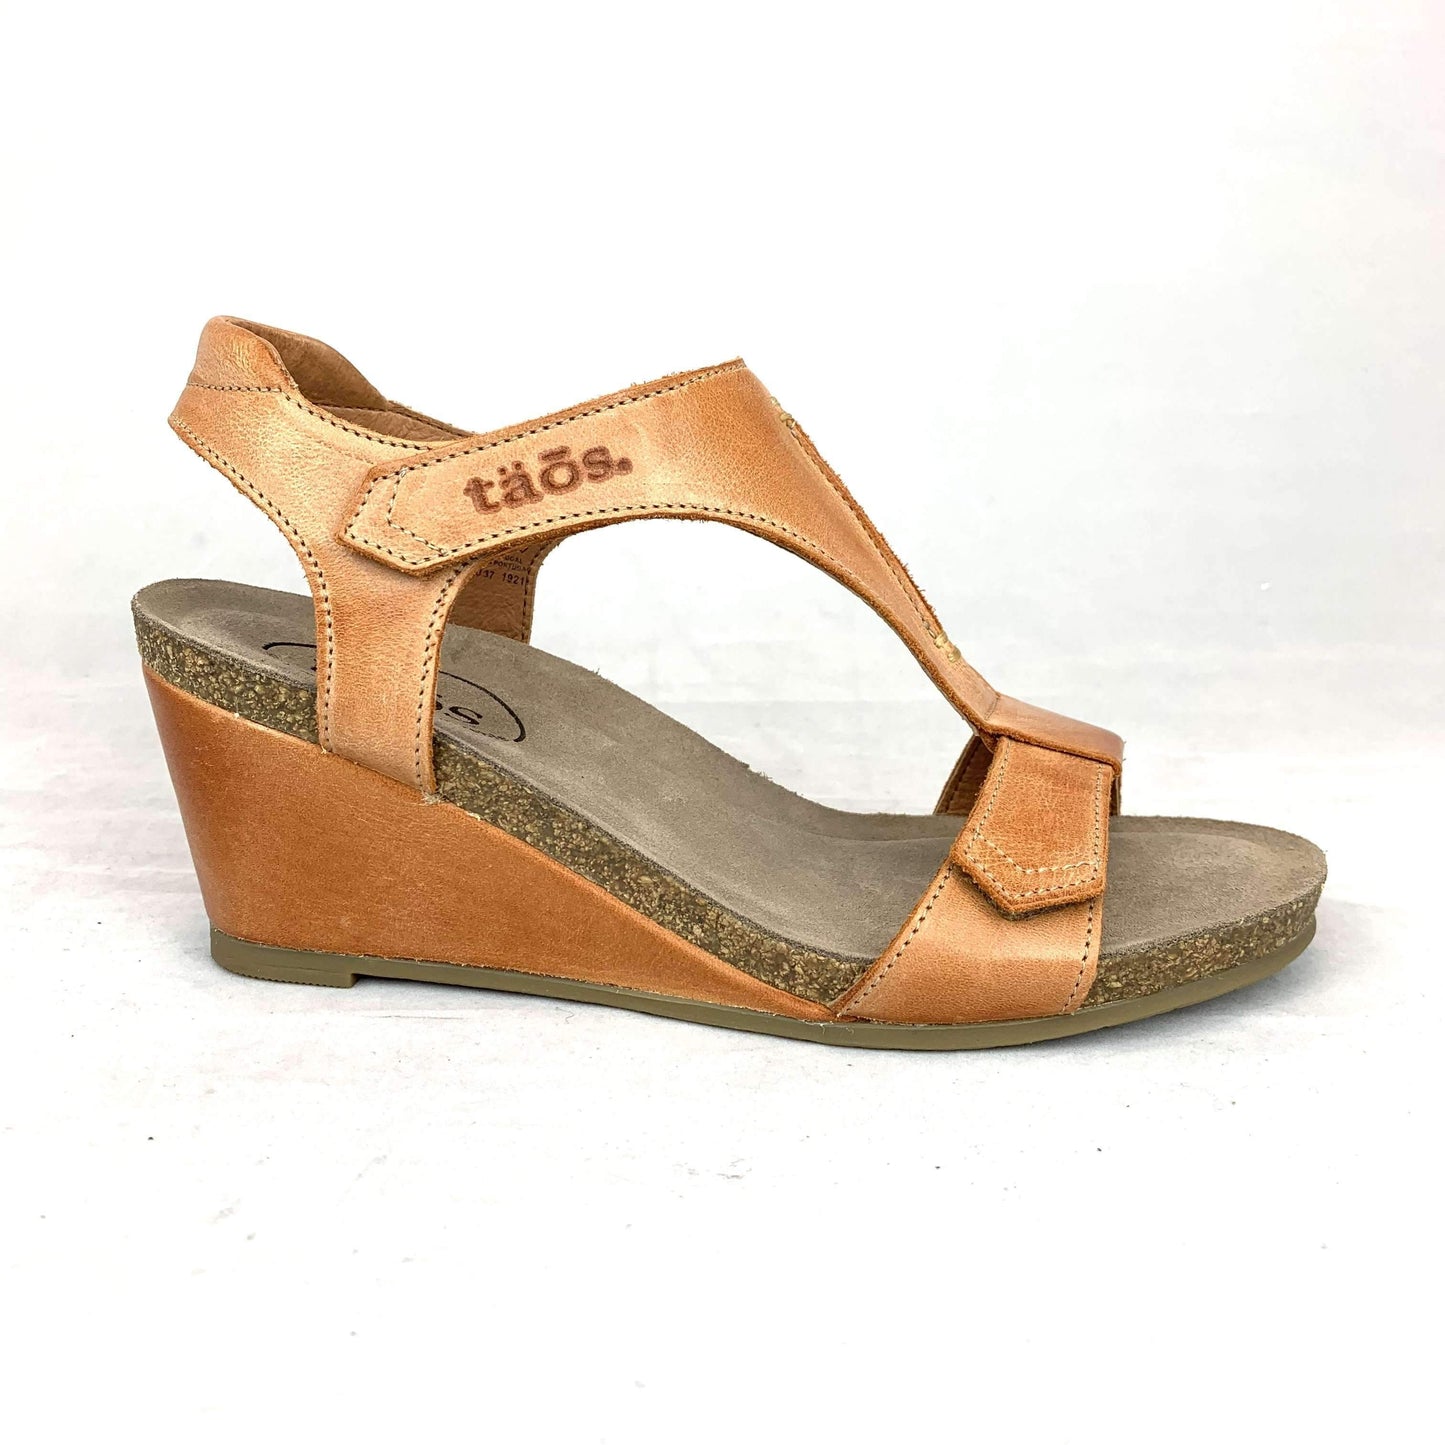 [Taos- Sheila Wedge with Adjustable Straps], [Sandals], [TAOS], [Plum Bottom].